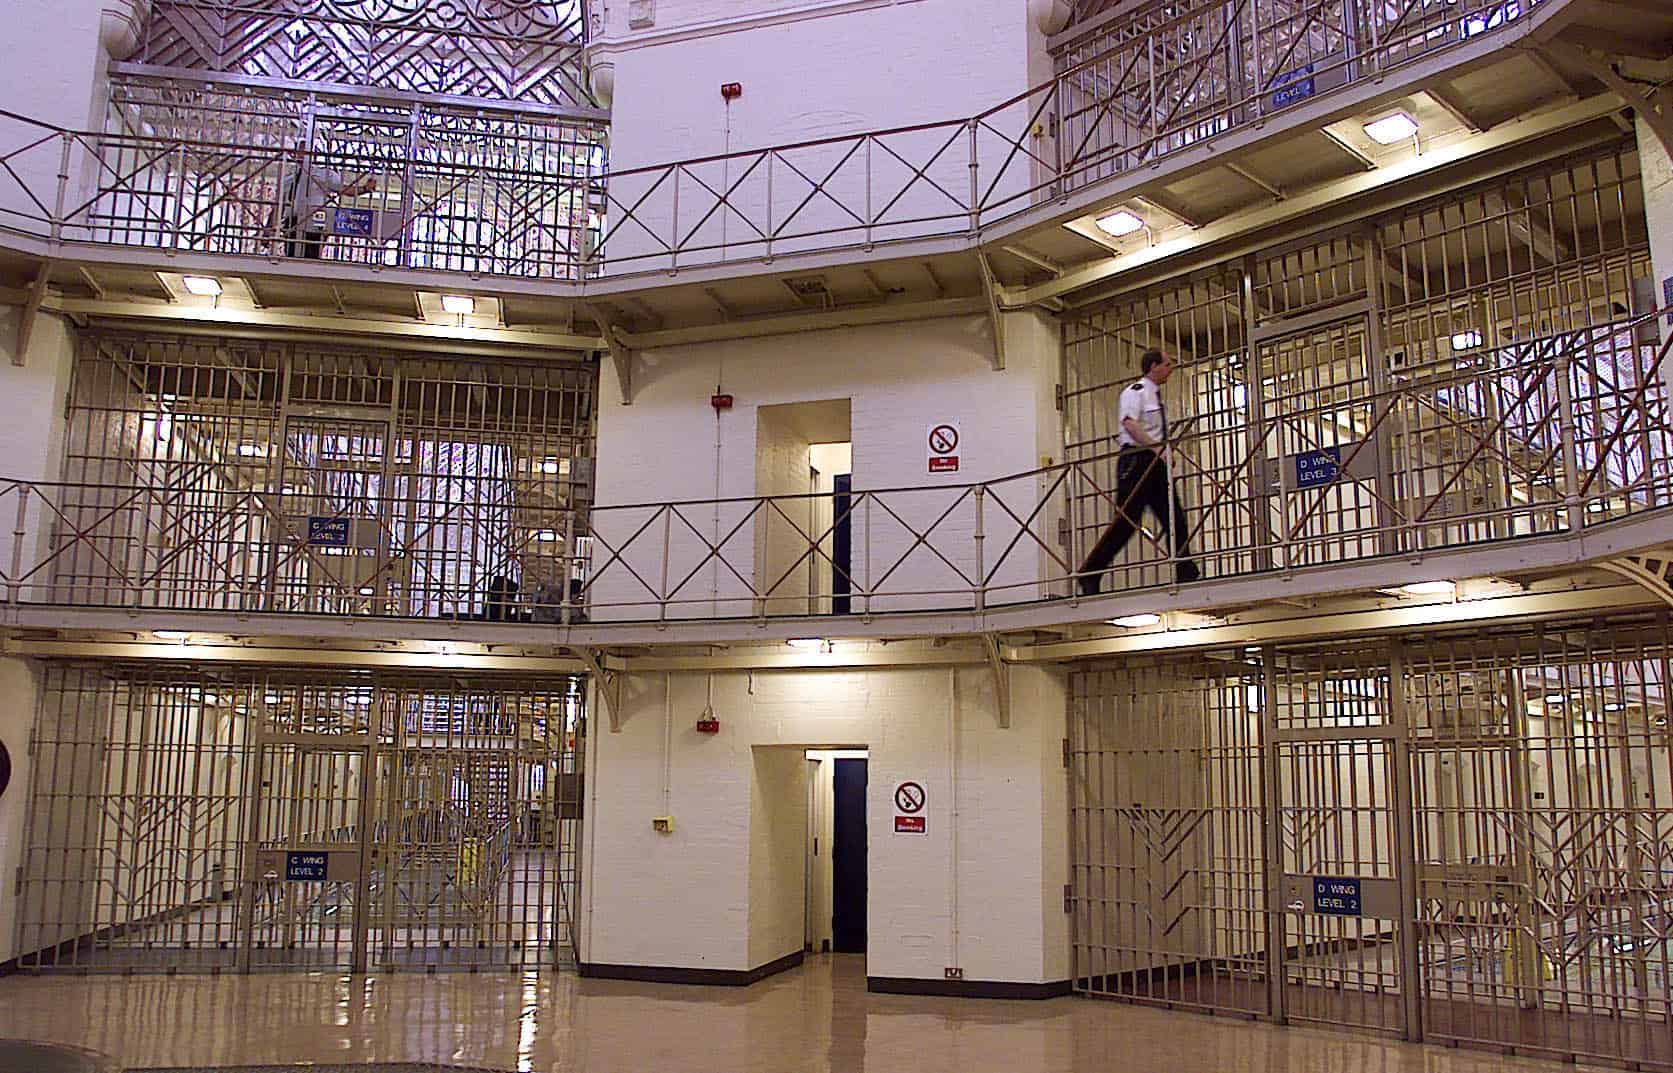 ‘How can any govt contemplate sending more people to prison’ – Violence continues to soar